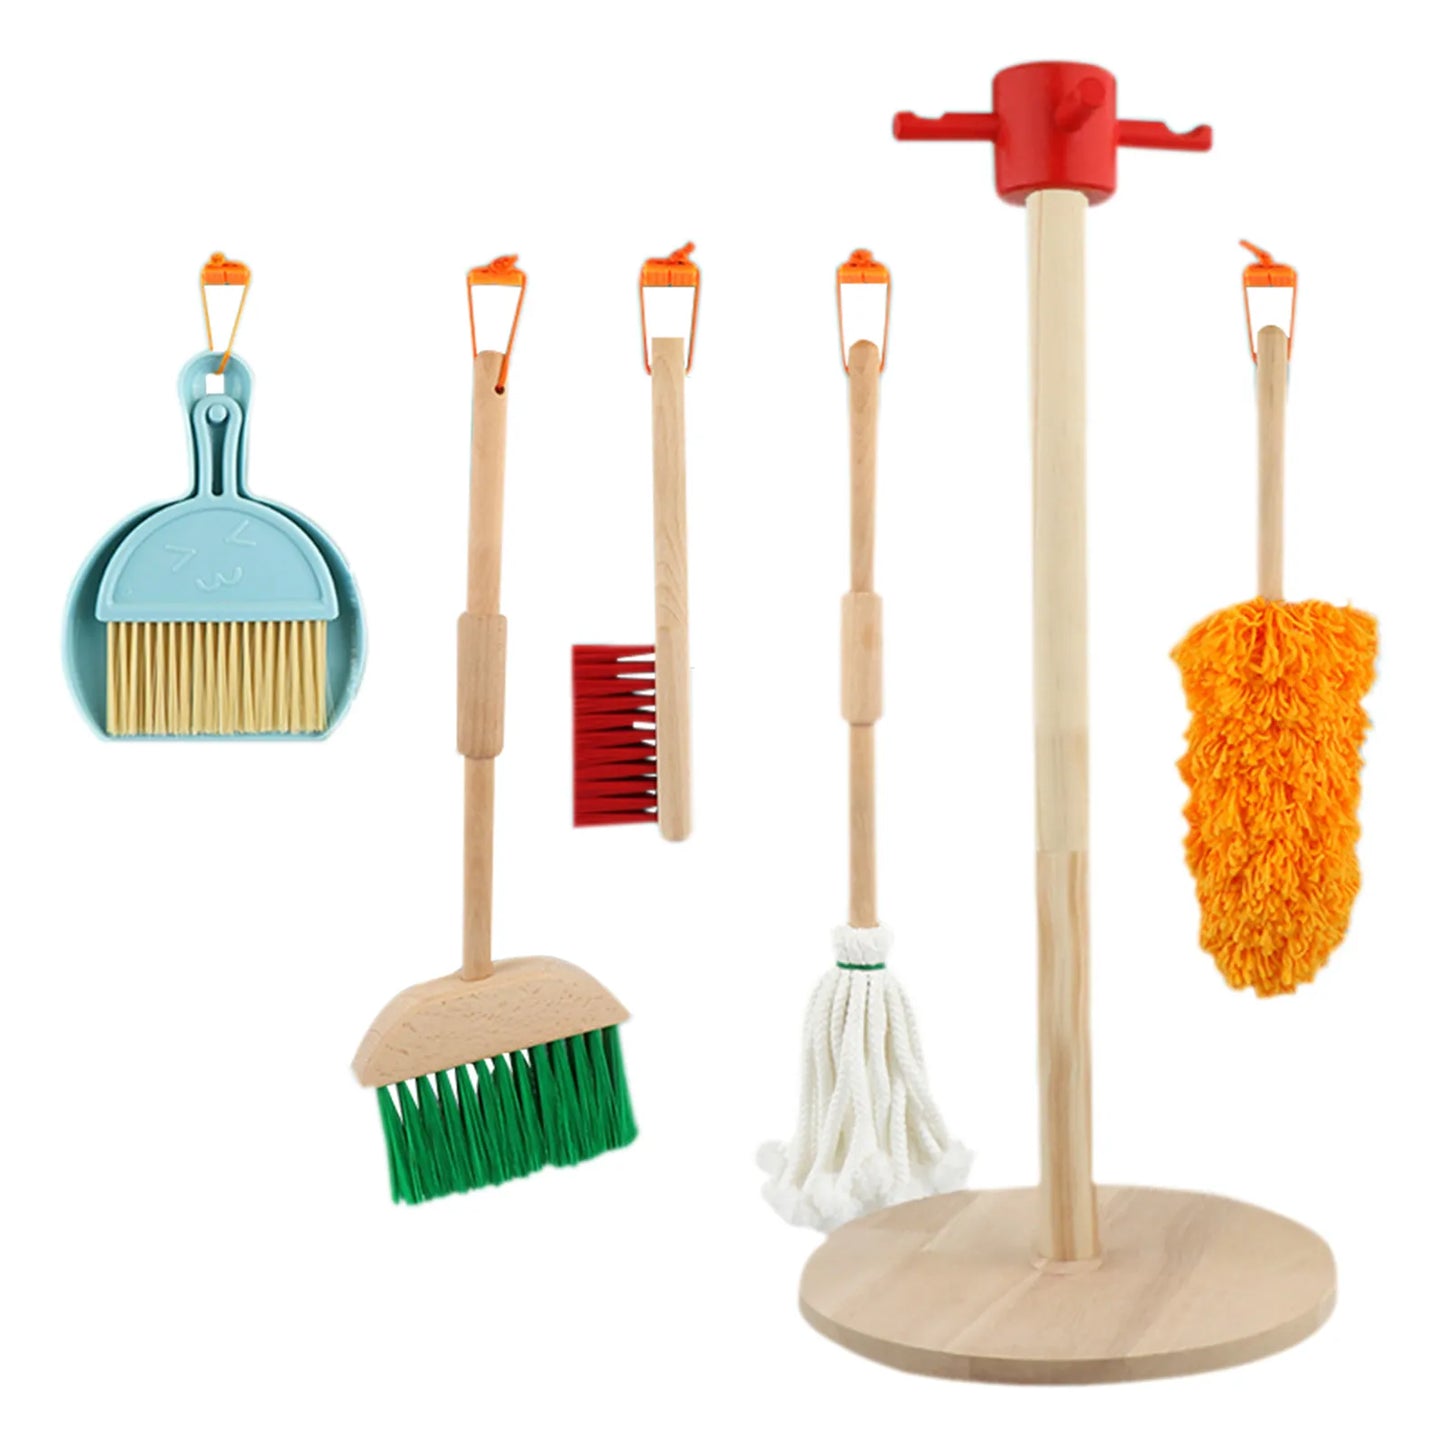 6 Pcs Children Pretend Play Wooden Broom Mop Cleaning Tool Toys Brain-Training Toy for Kids Educational Learning Toys